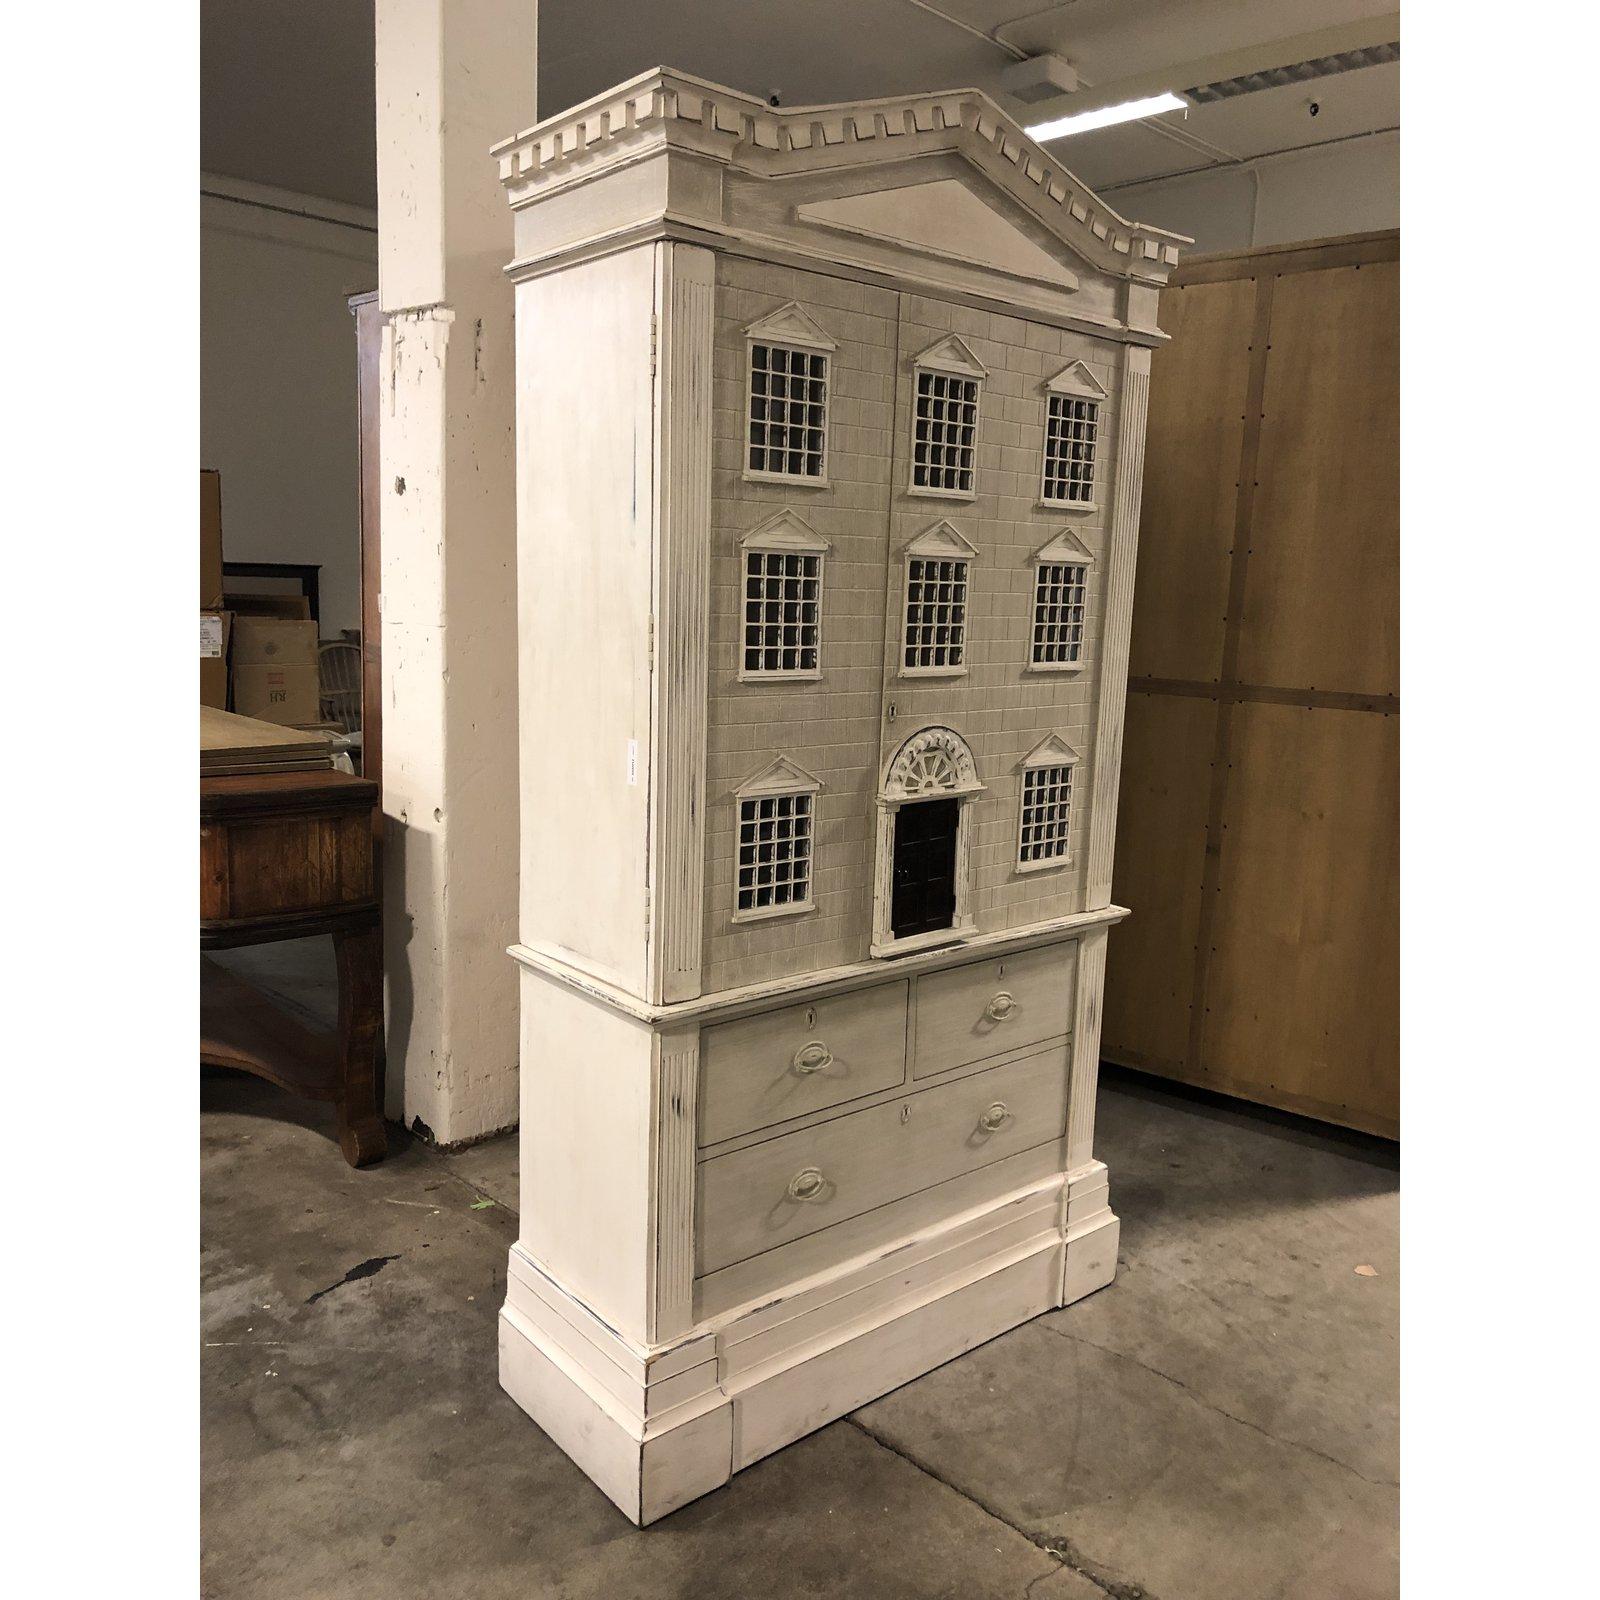 A doll house cabinet by Restoration Hardware. Inspired by architectural grandeur of a neoclassical home. A multipurpose storage cabinet, giving it a playful edge that lends charm to any room. Designed to look like an antique dollhouse but function